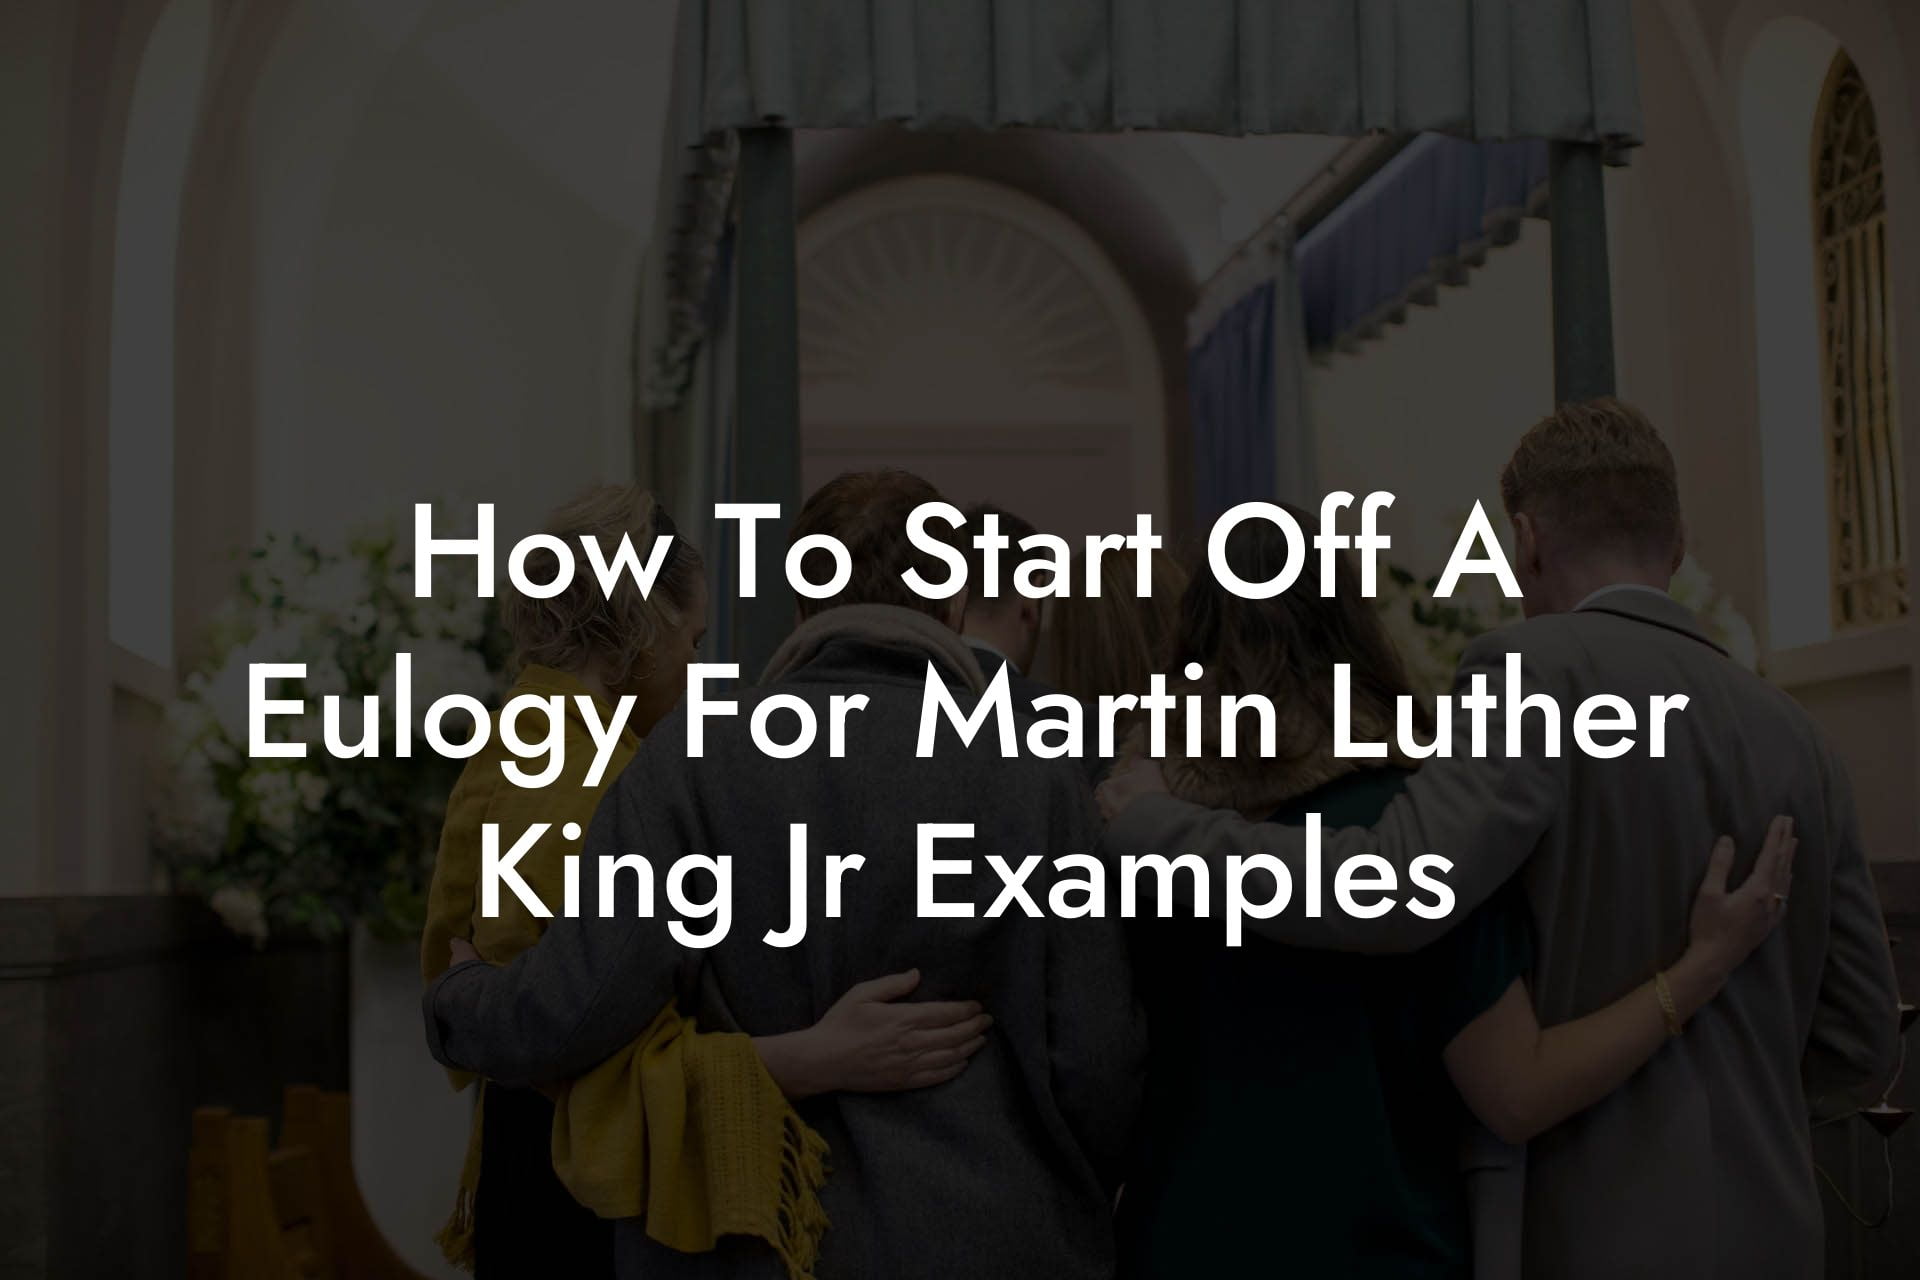 How To Start Off A Eulogy For Martin Luther King Jr Examples